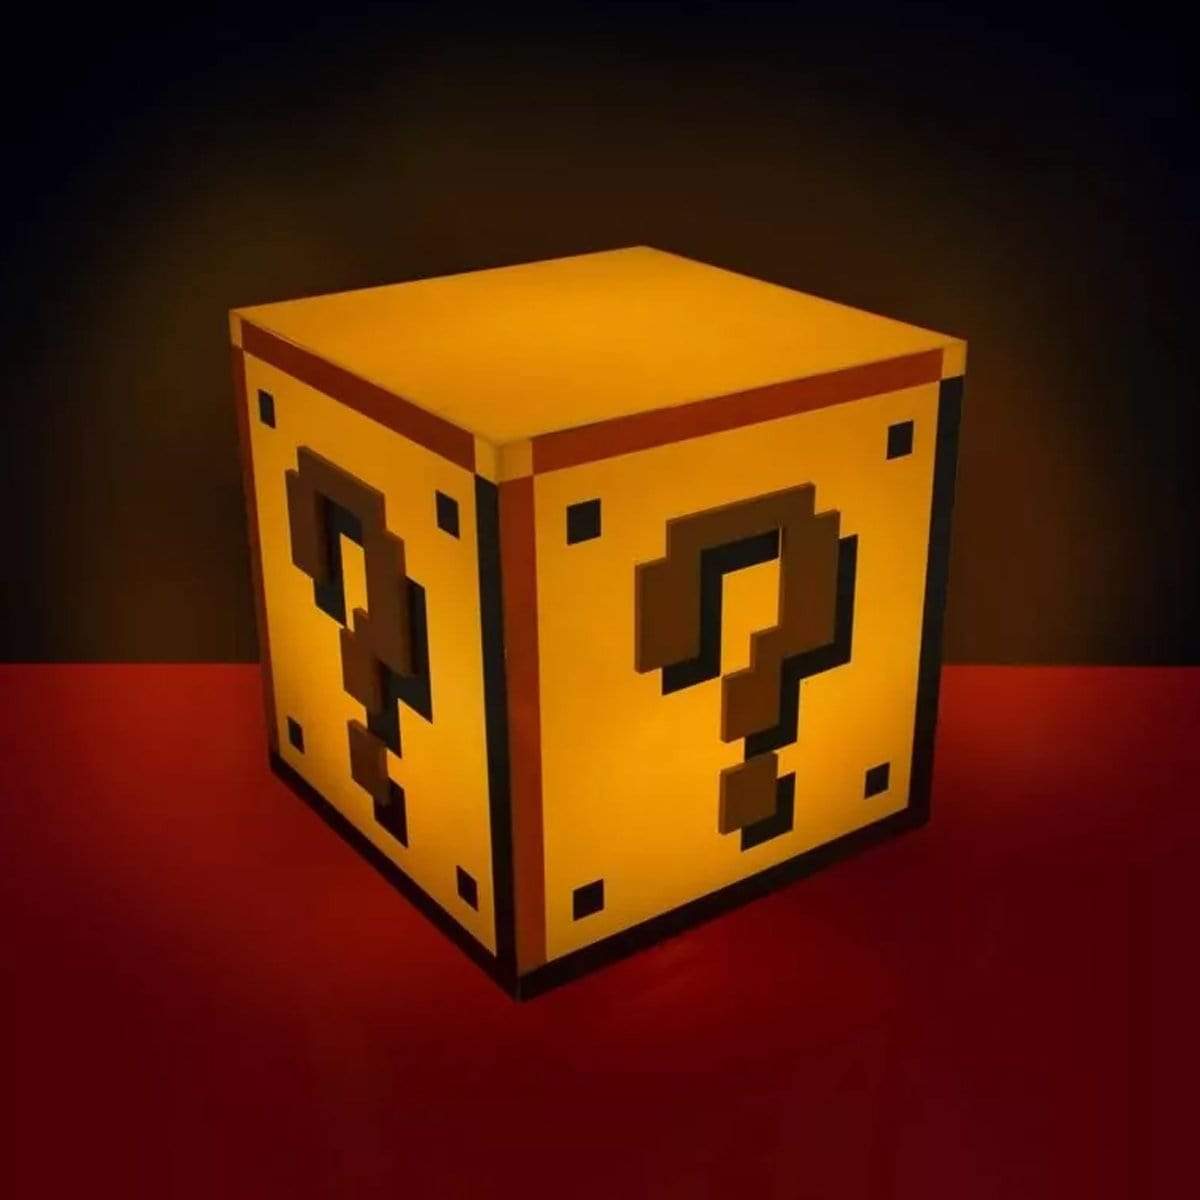 Super Mario Brothers Question Block Lamp - Level Up